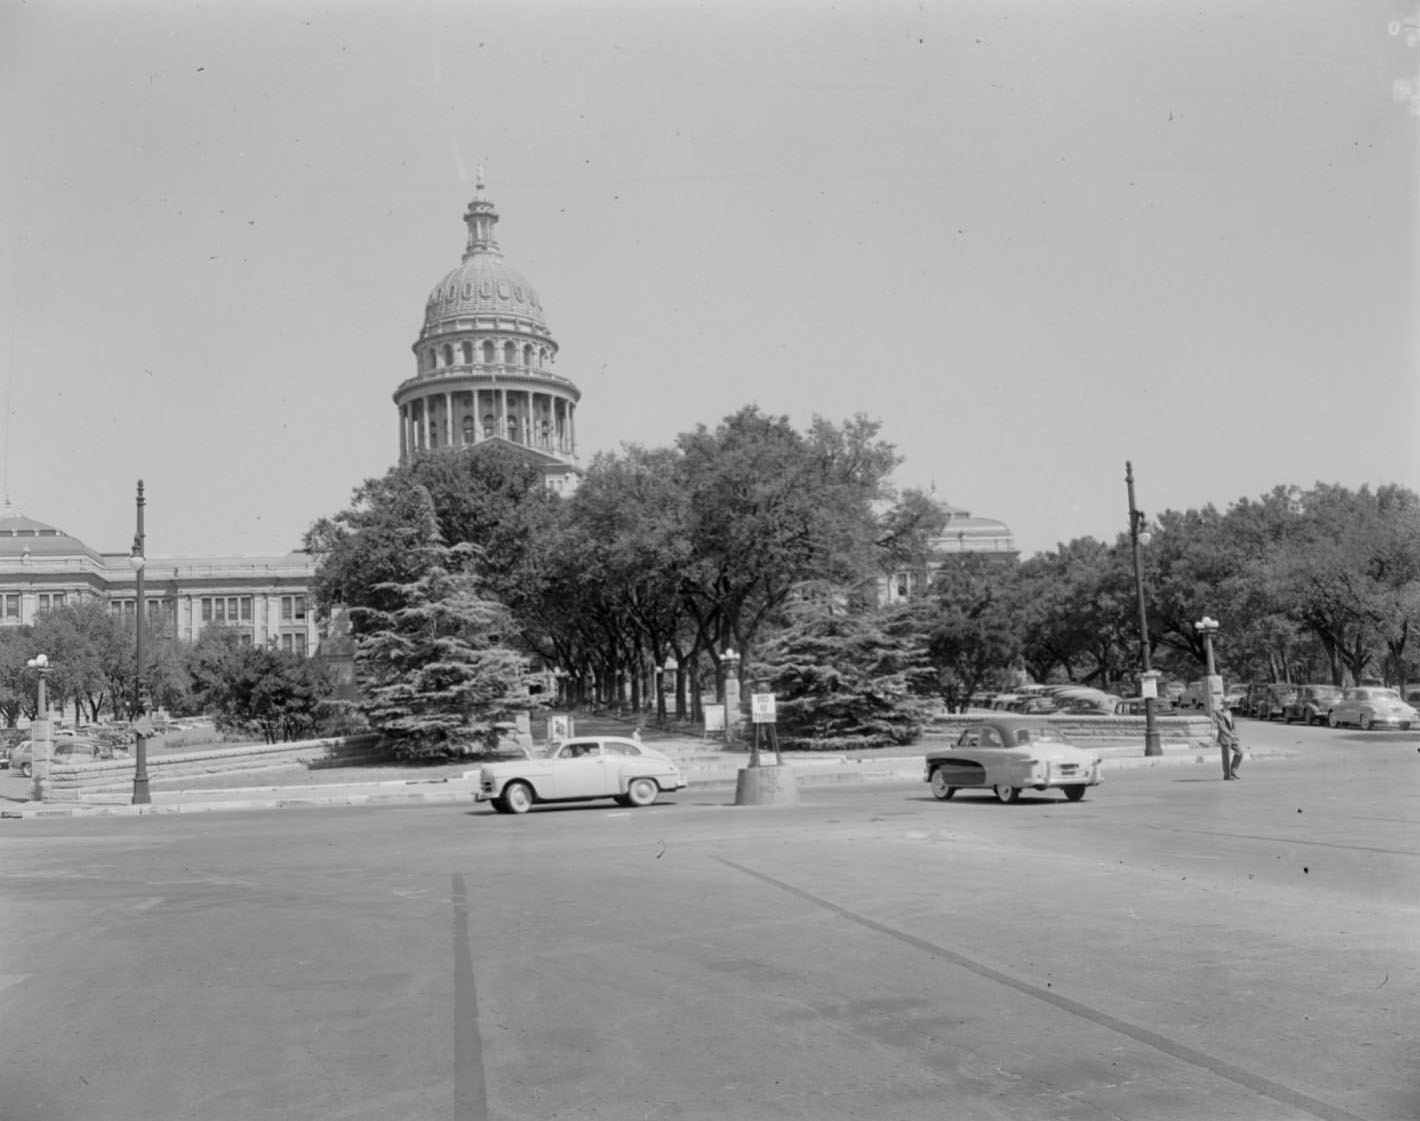 The front of the Capitol building in Austin, 1954